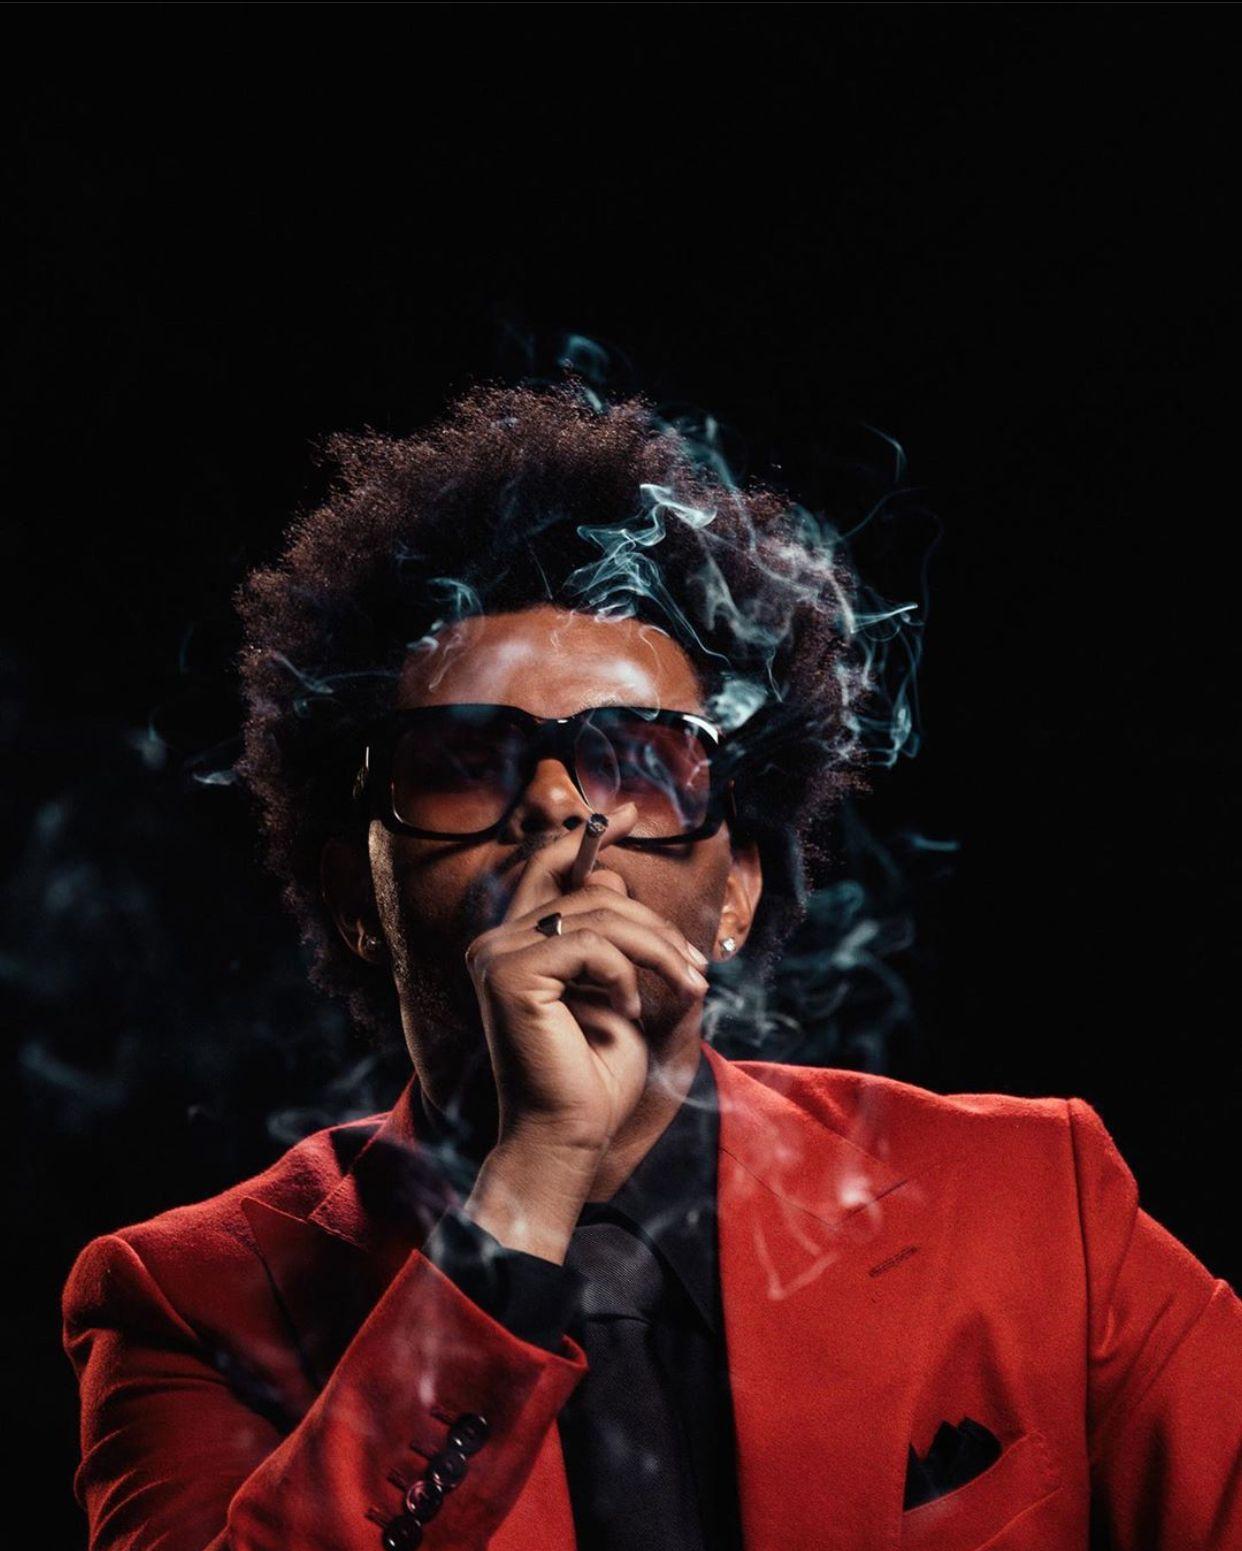 A man in red suit smoking cigarette - The Weeknd